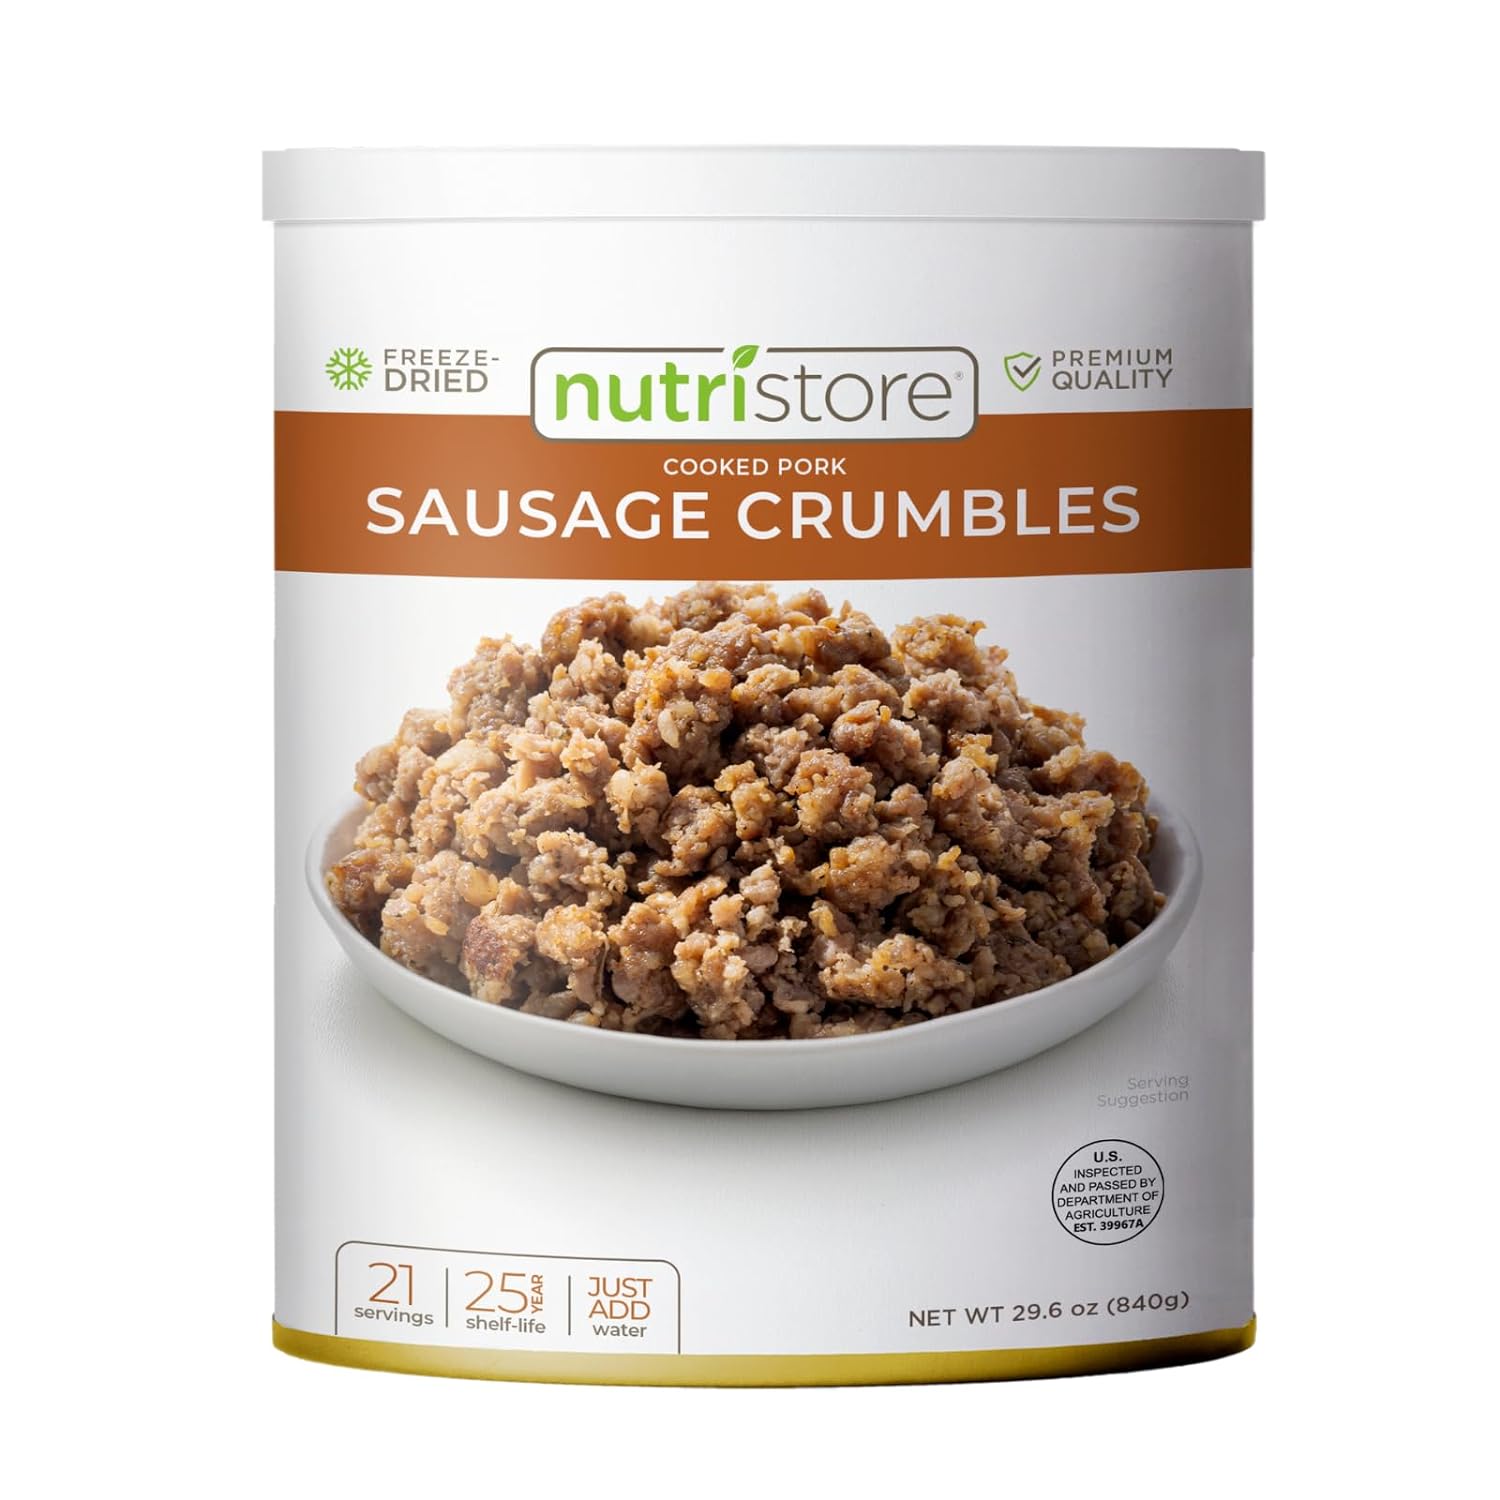 Nutristore Freeze Dried Sausage Crumbles | Survival Emergency Food Supply, Meal Prep, Camping | Made in USA | 25 Year Shelf Life | #10 Can, 29.6 oz